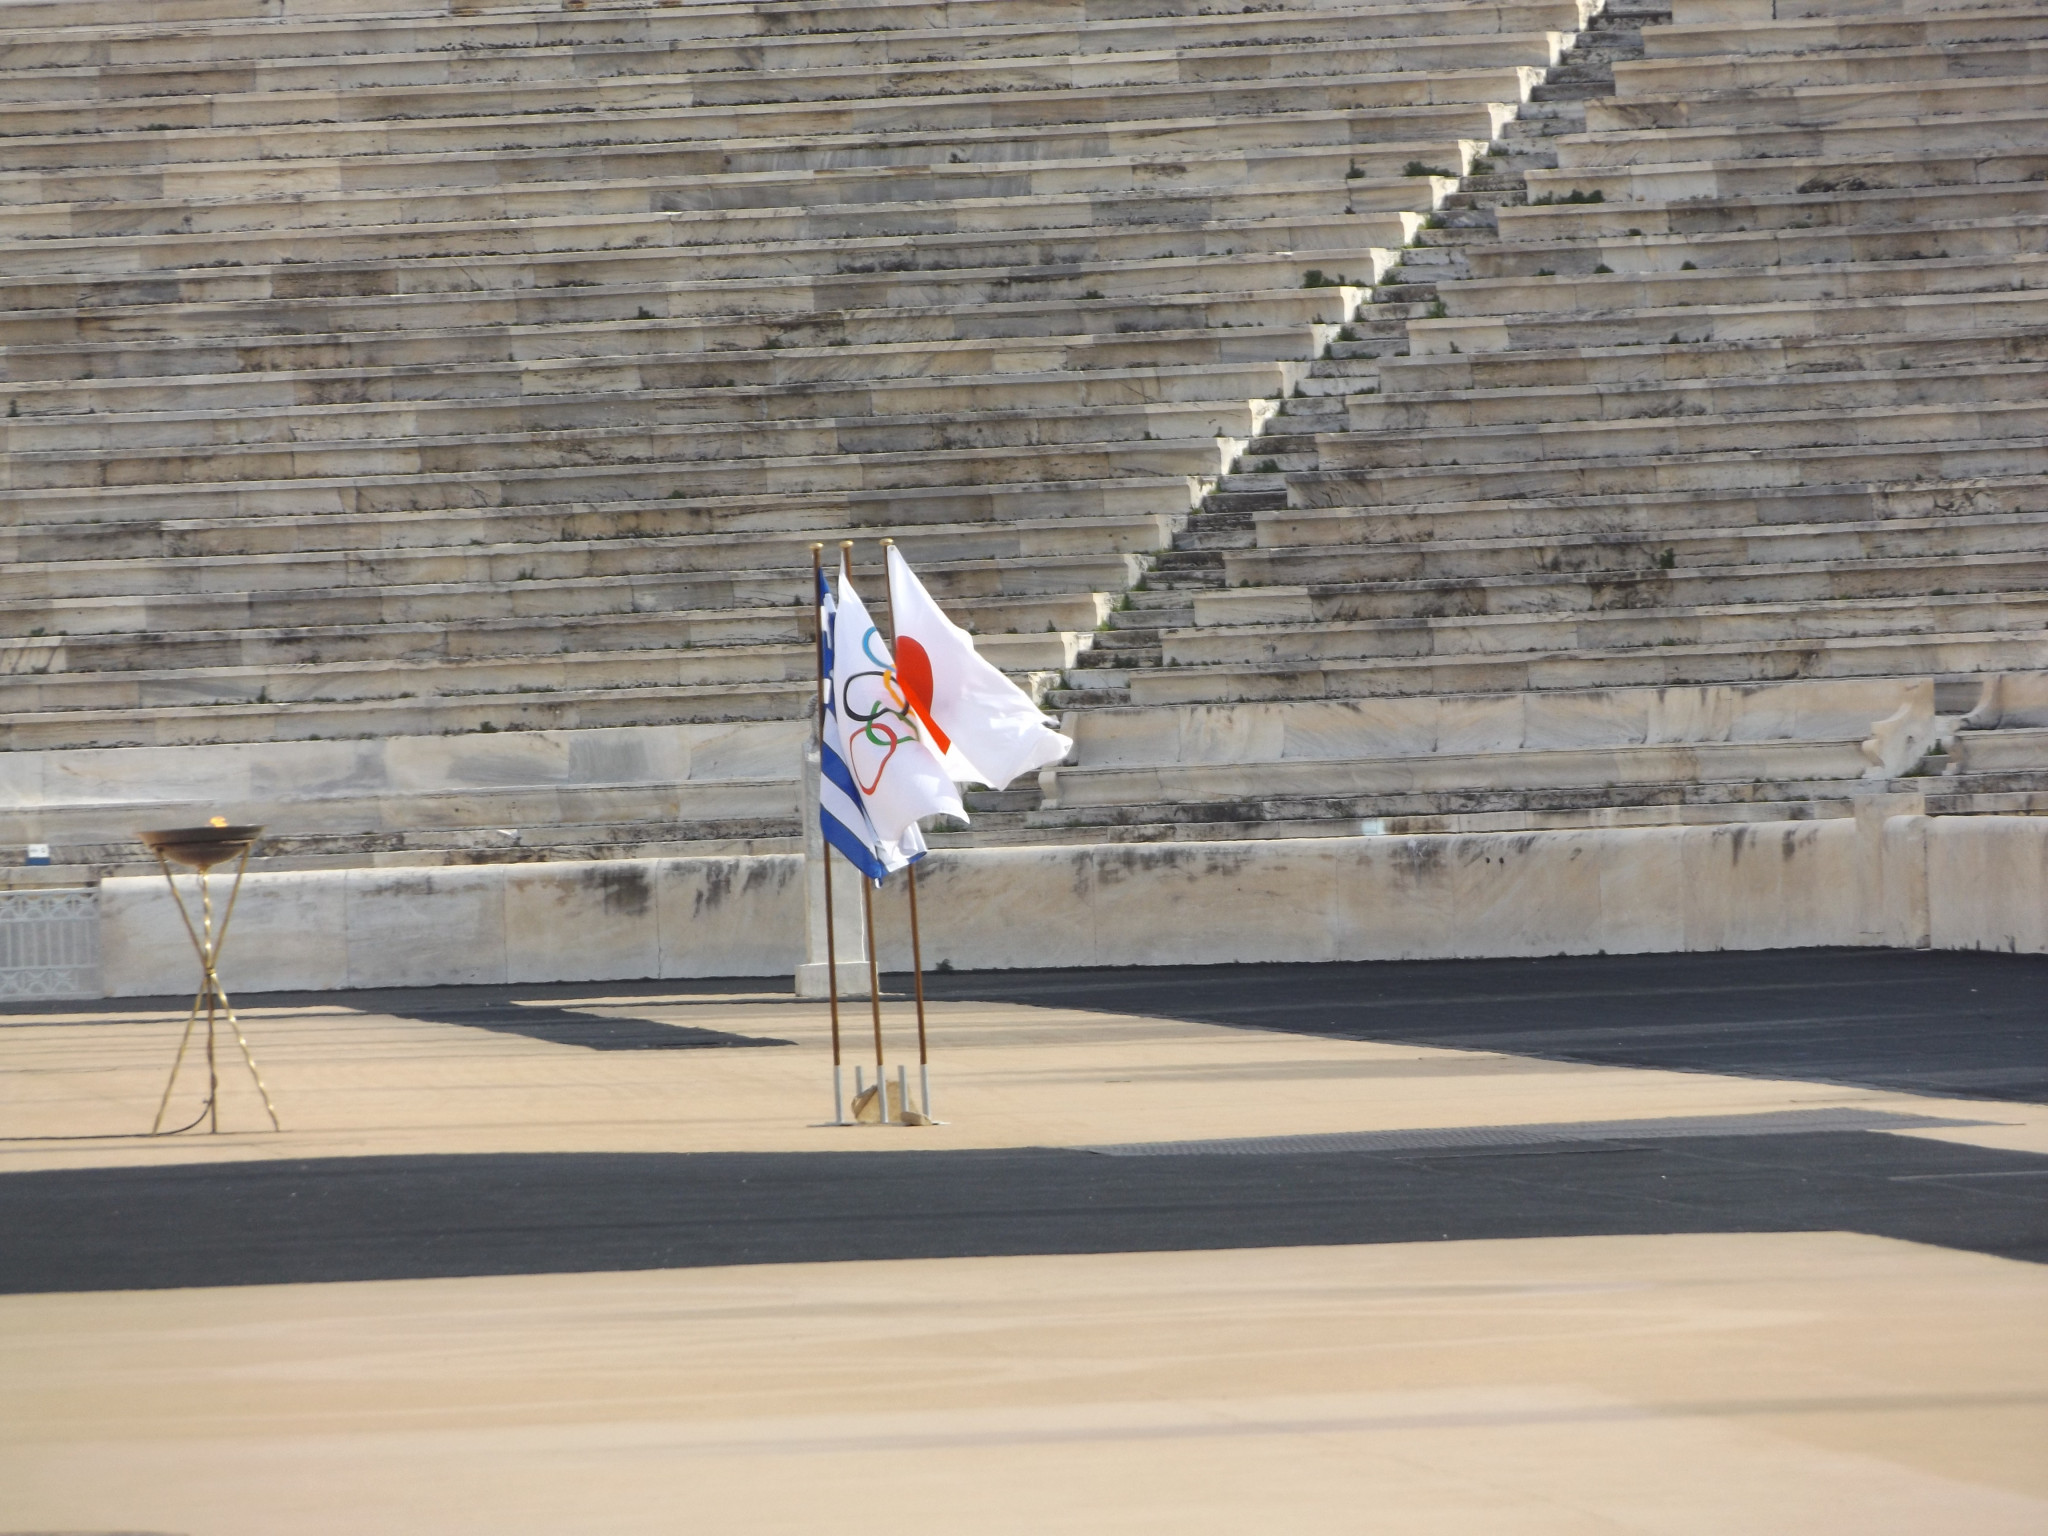 Greek, Japanese and Olympic flags at the Panathinaiko Stadium in Athens ©Philip Barker